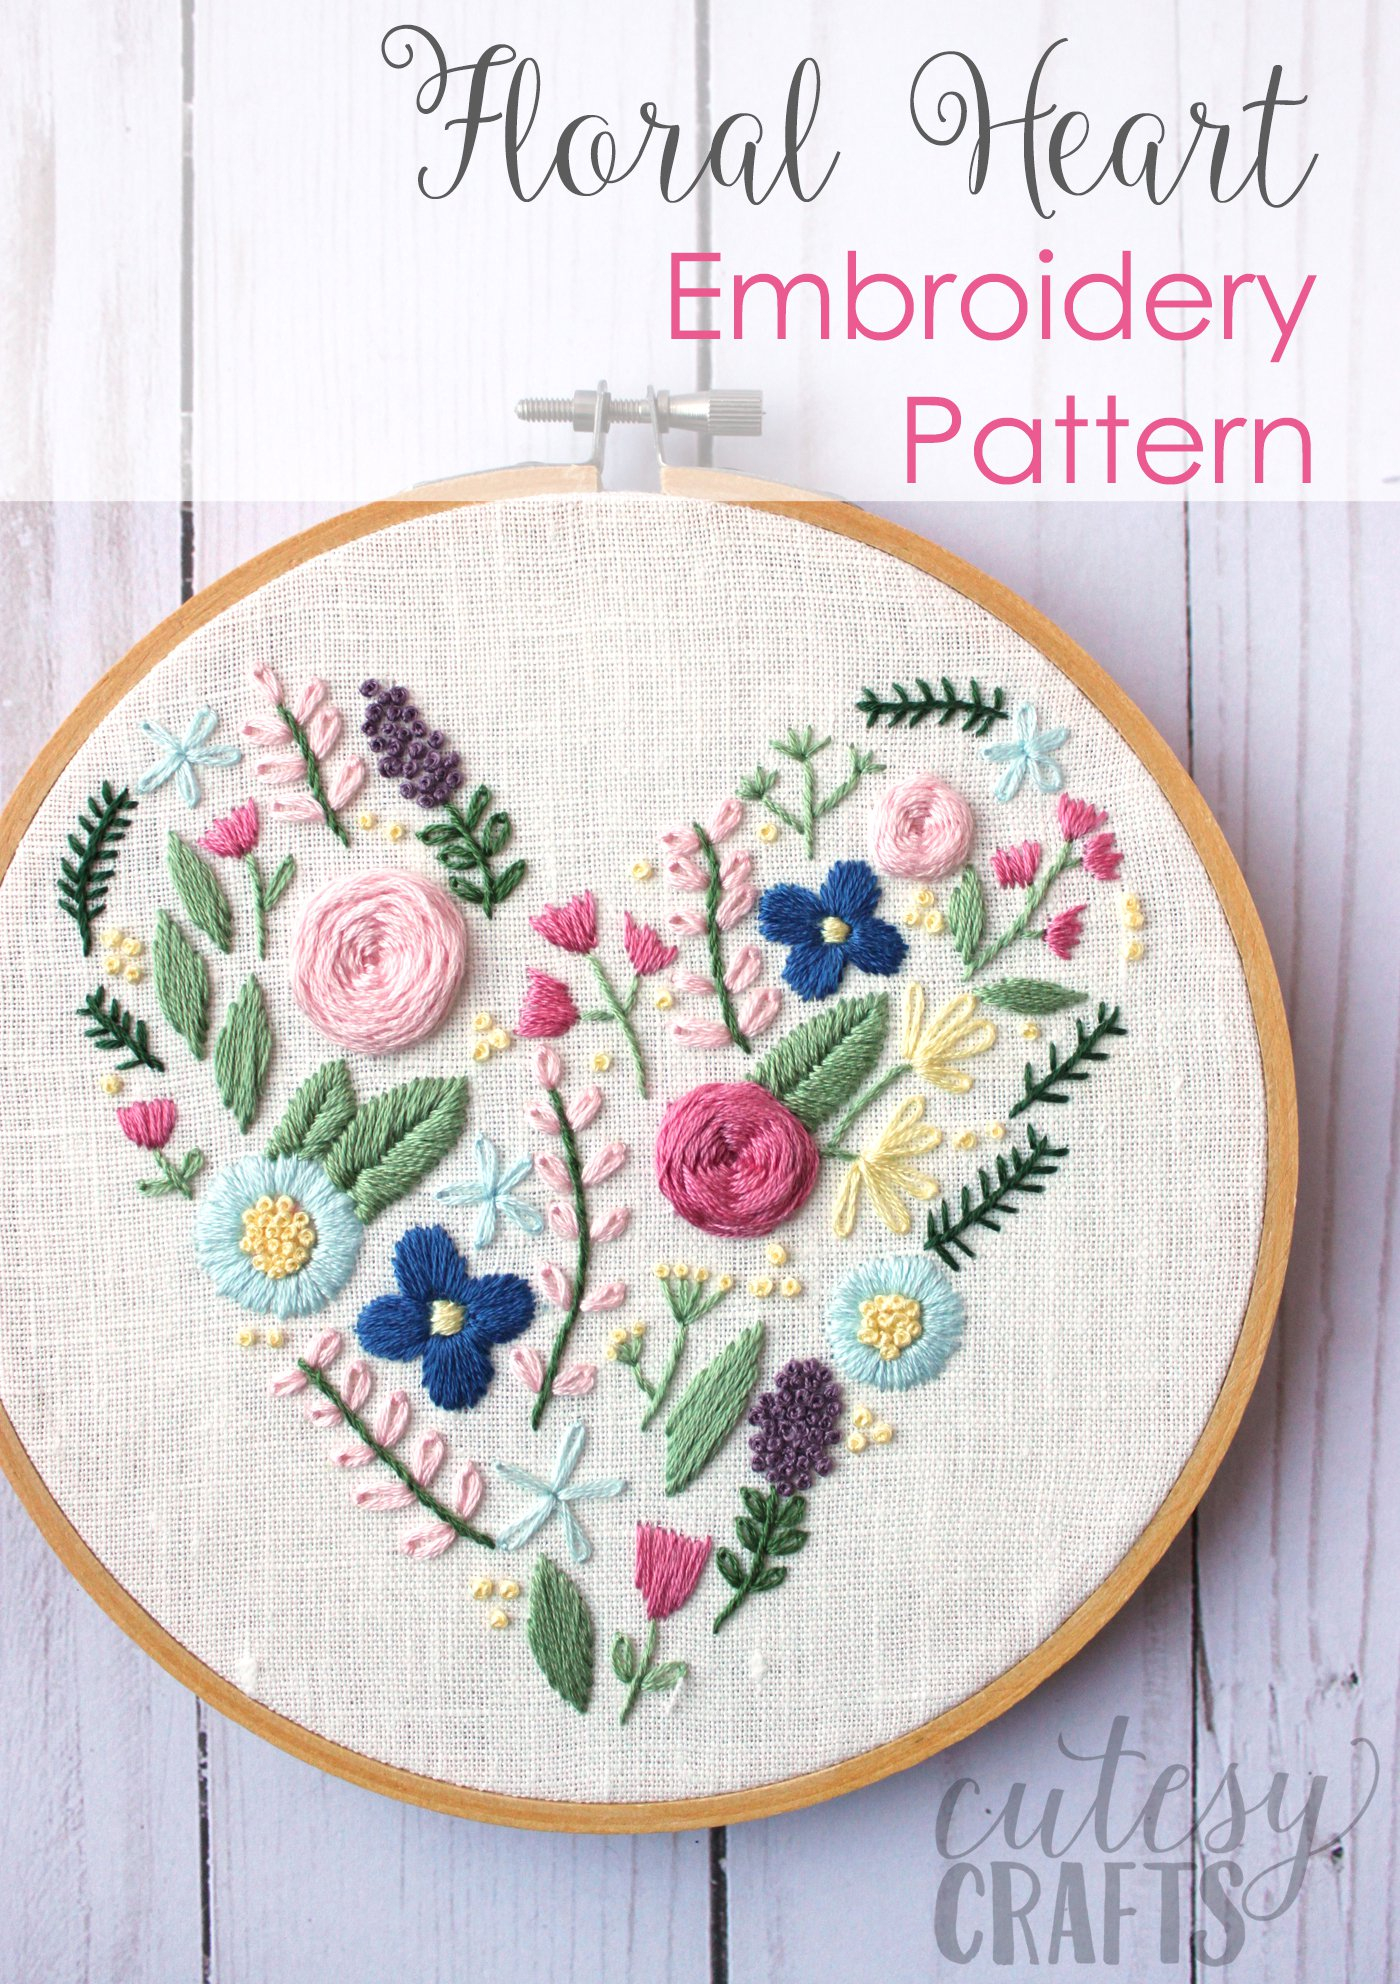 Free Machine Embroidery Patterns To Download Floral Heart Hand Embroidery Pattern The Polka Dot Chair